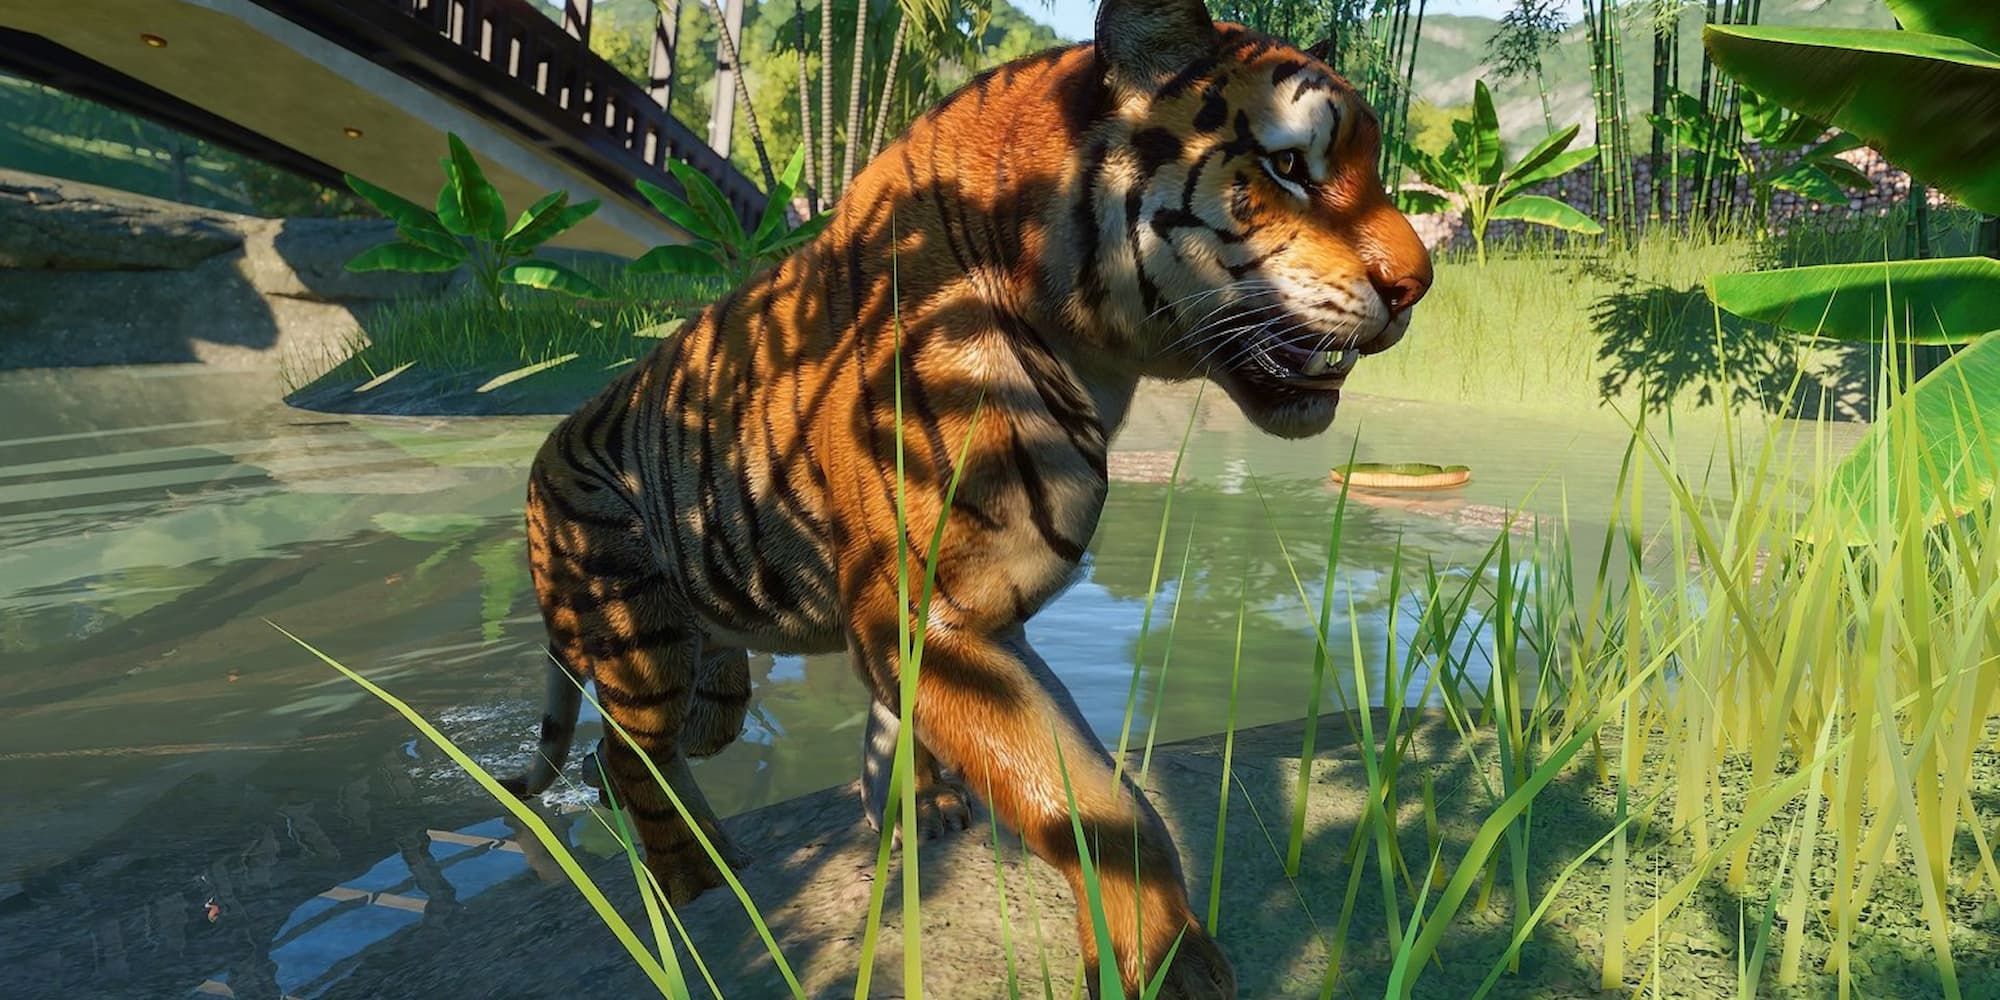 A tiger emerges from a body of water under a bridge in Planet Zoo.